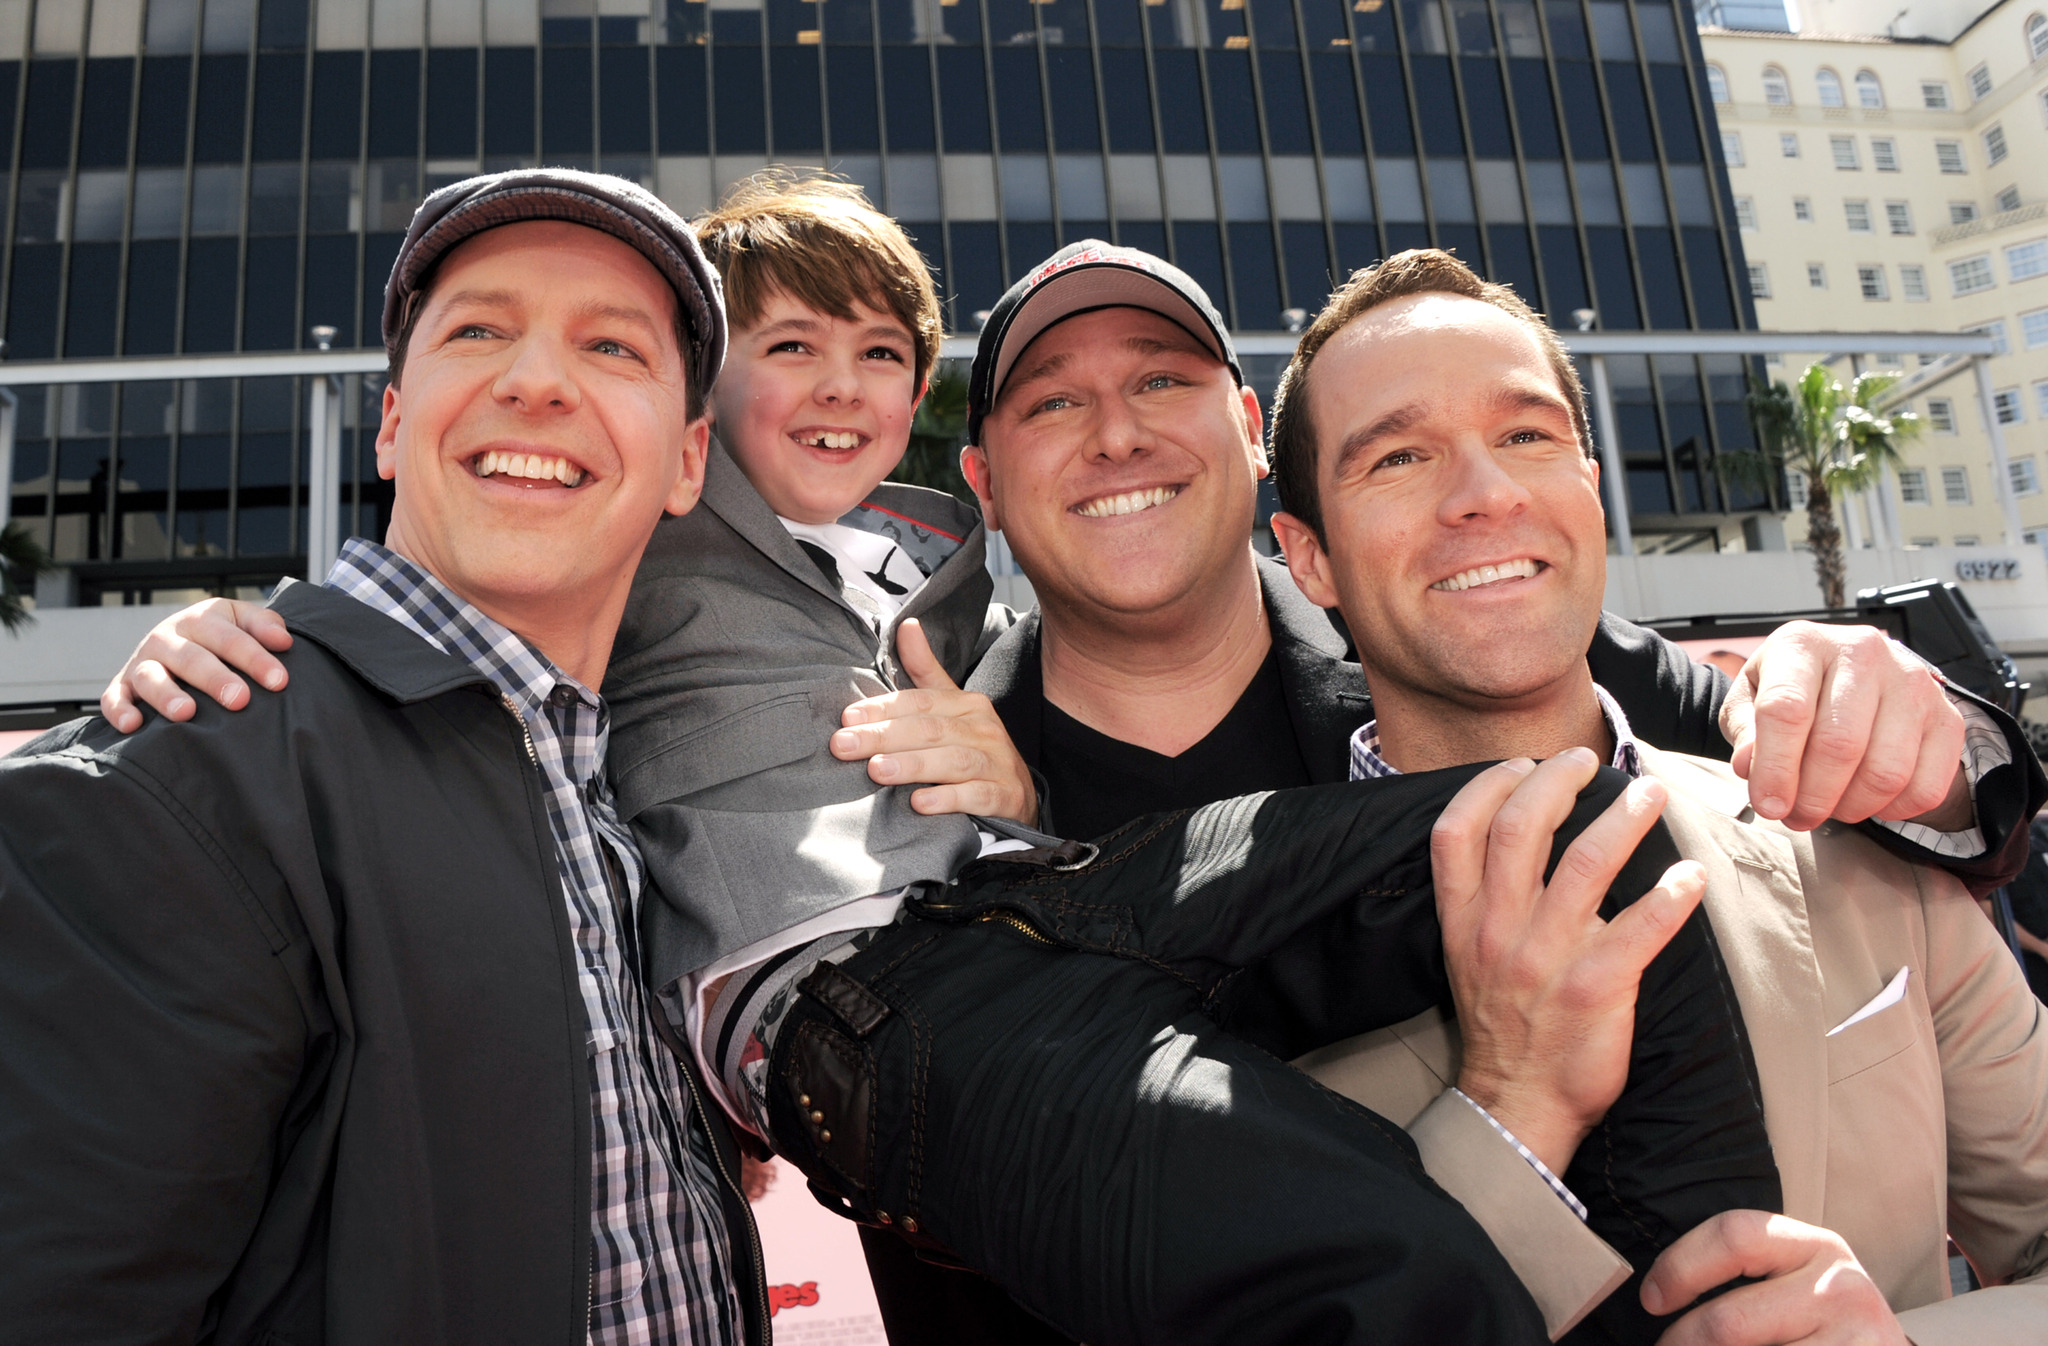 Sean Hayes, Chris Diamantopoulos, Will Sasso and Max Charles at event of Trys veplos (2012)